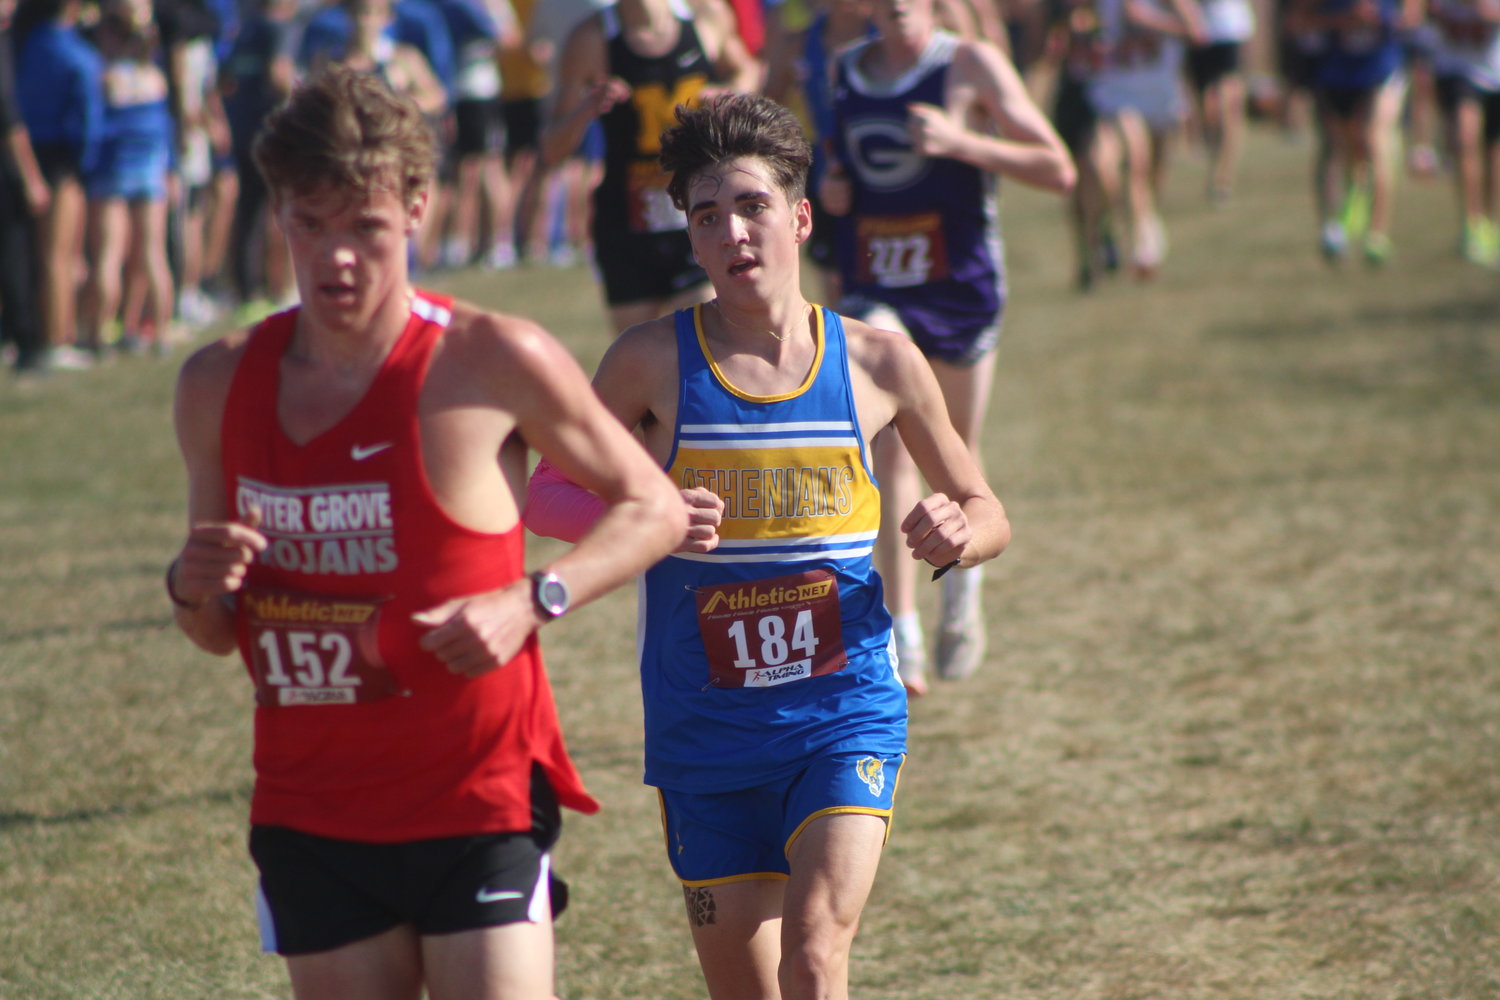 Crawfordsville's Ryan Miller broke the school record multiple times this season. He'll return next year to lead what is expected be another talented boys team.